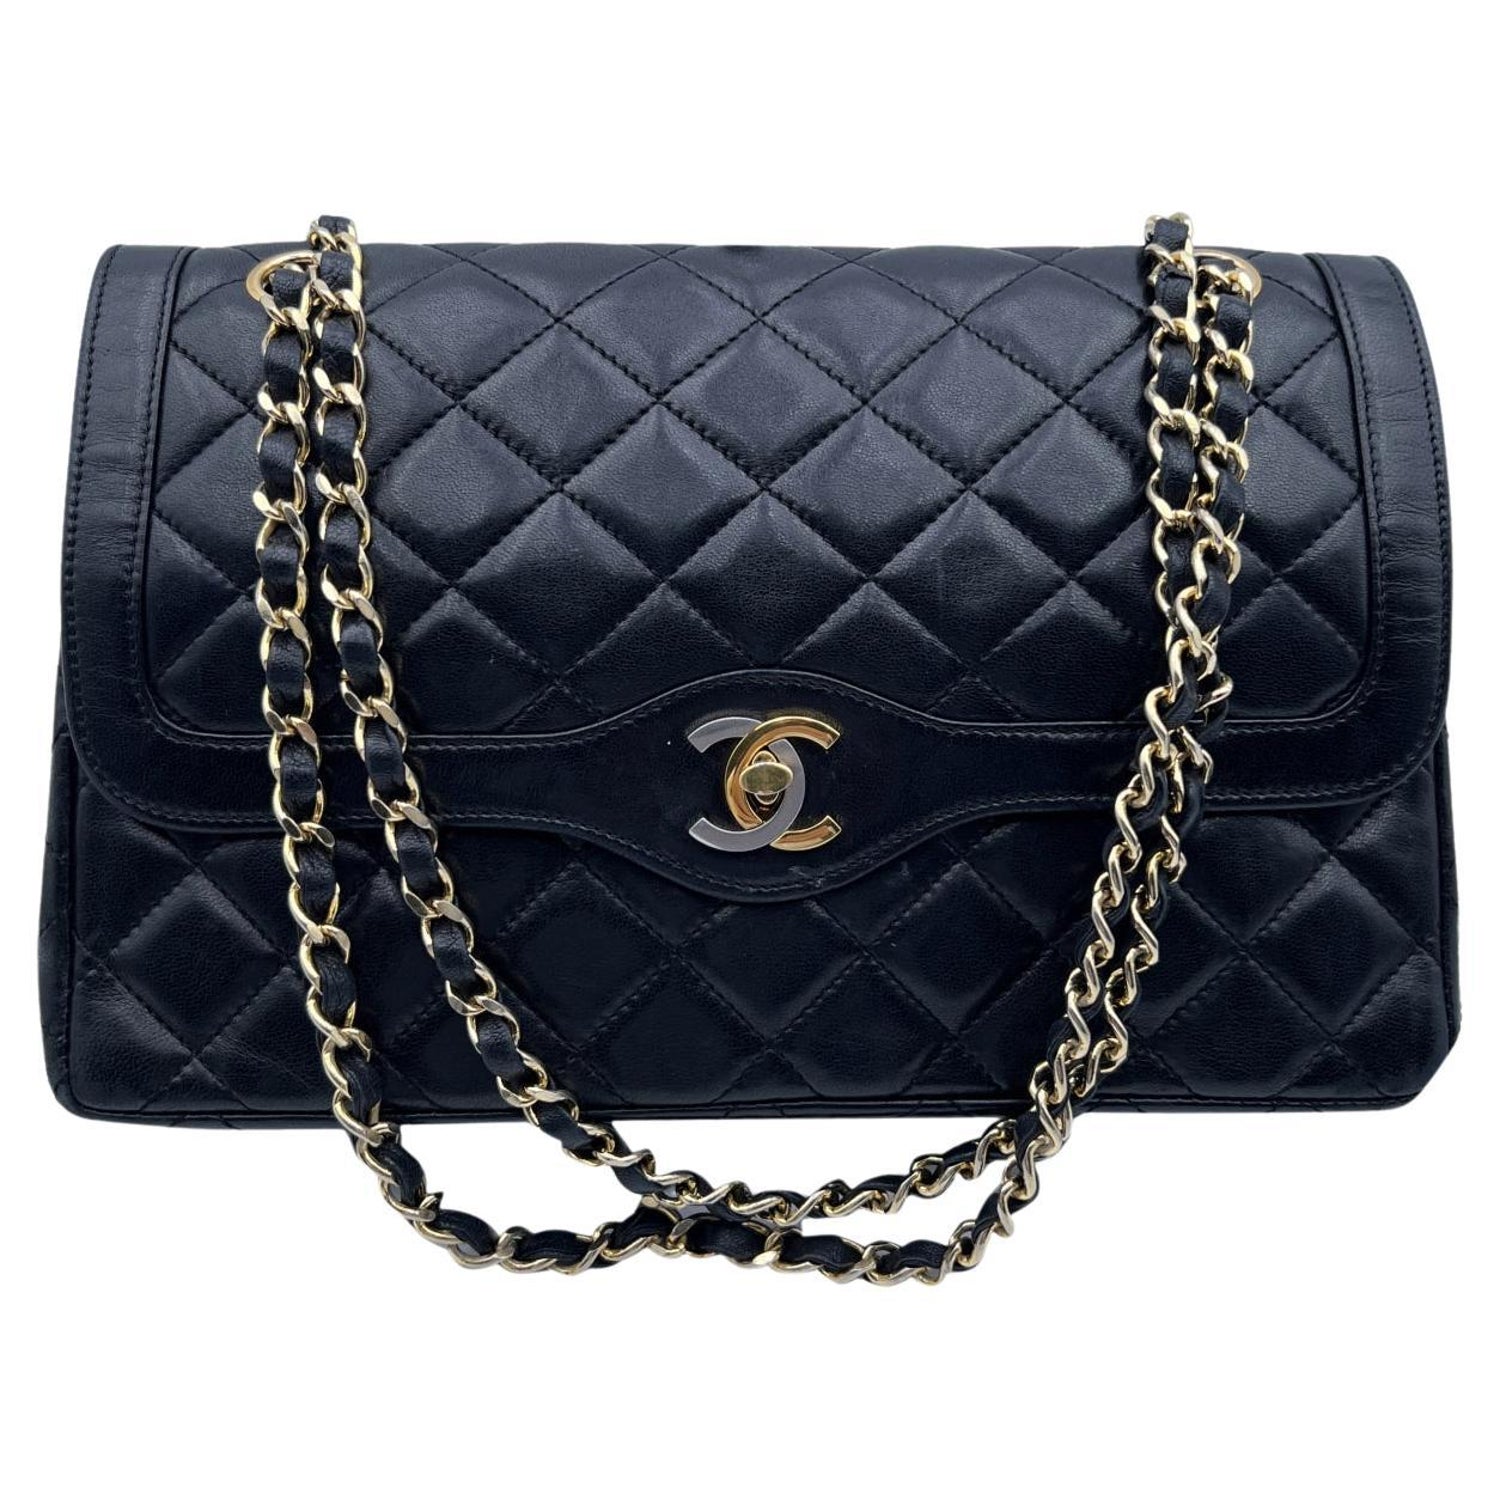 5 Occasions Celebrities Rocked Chanel's Gabrielle Bag